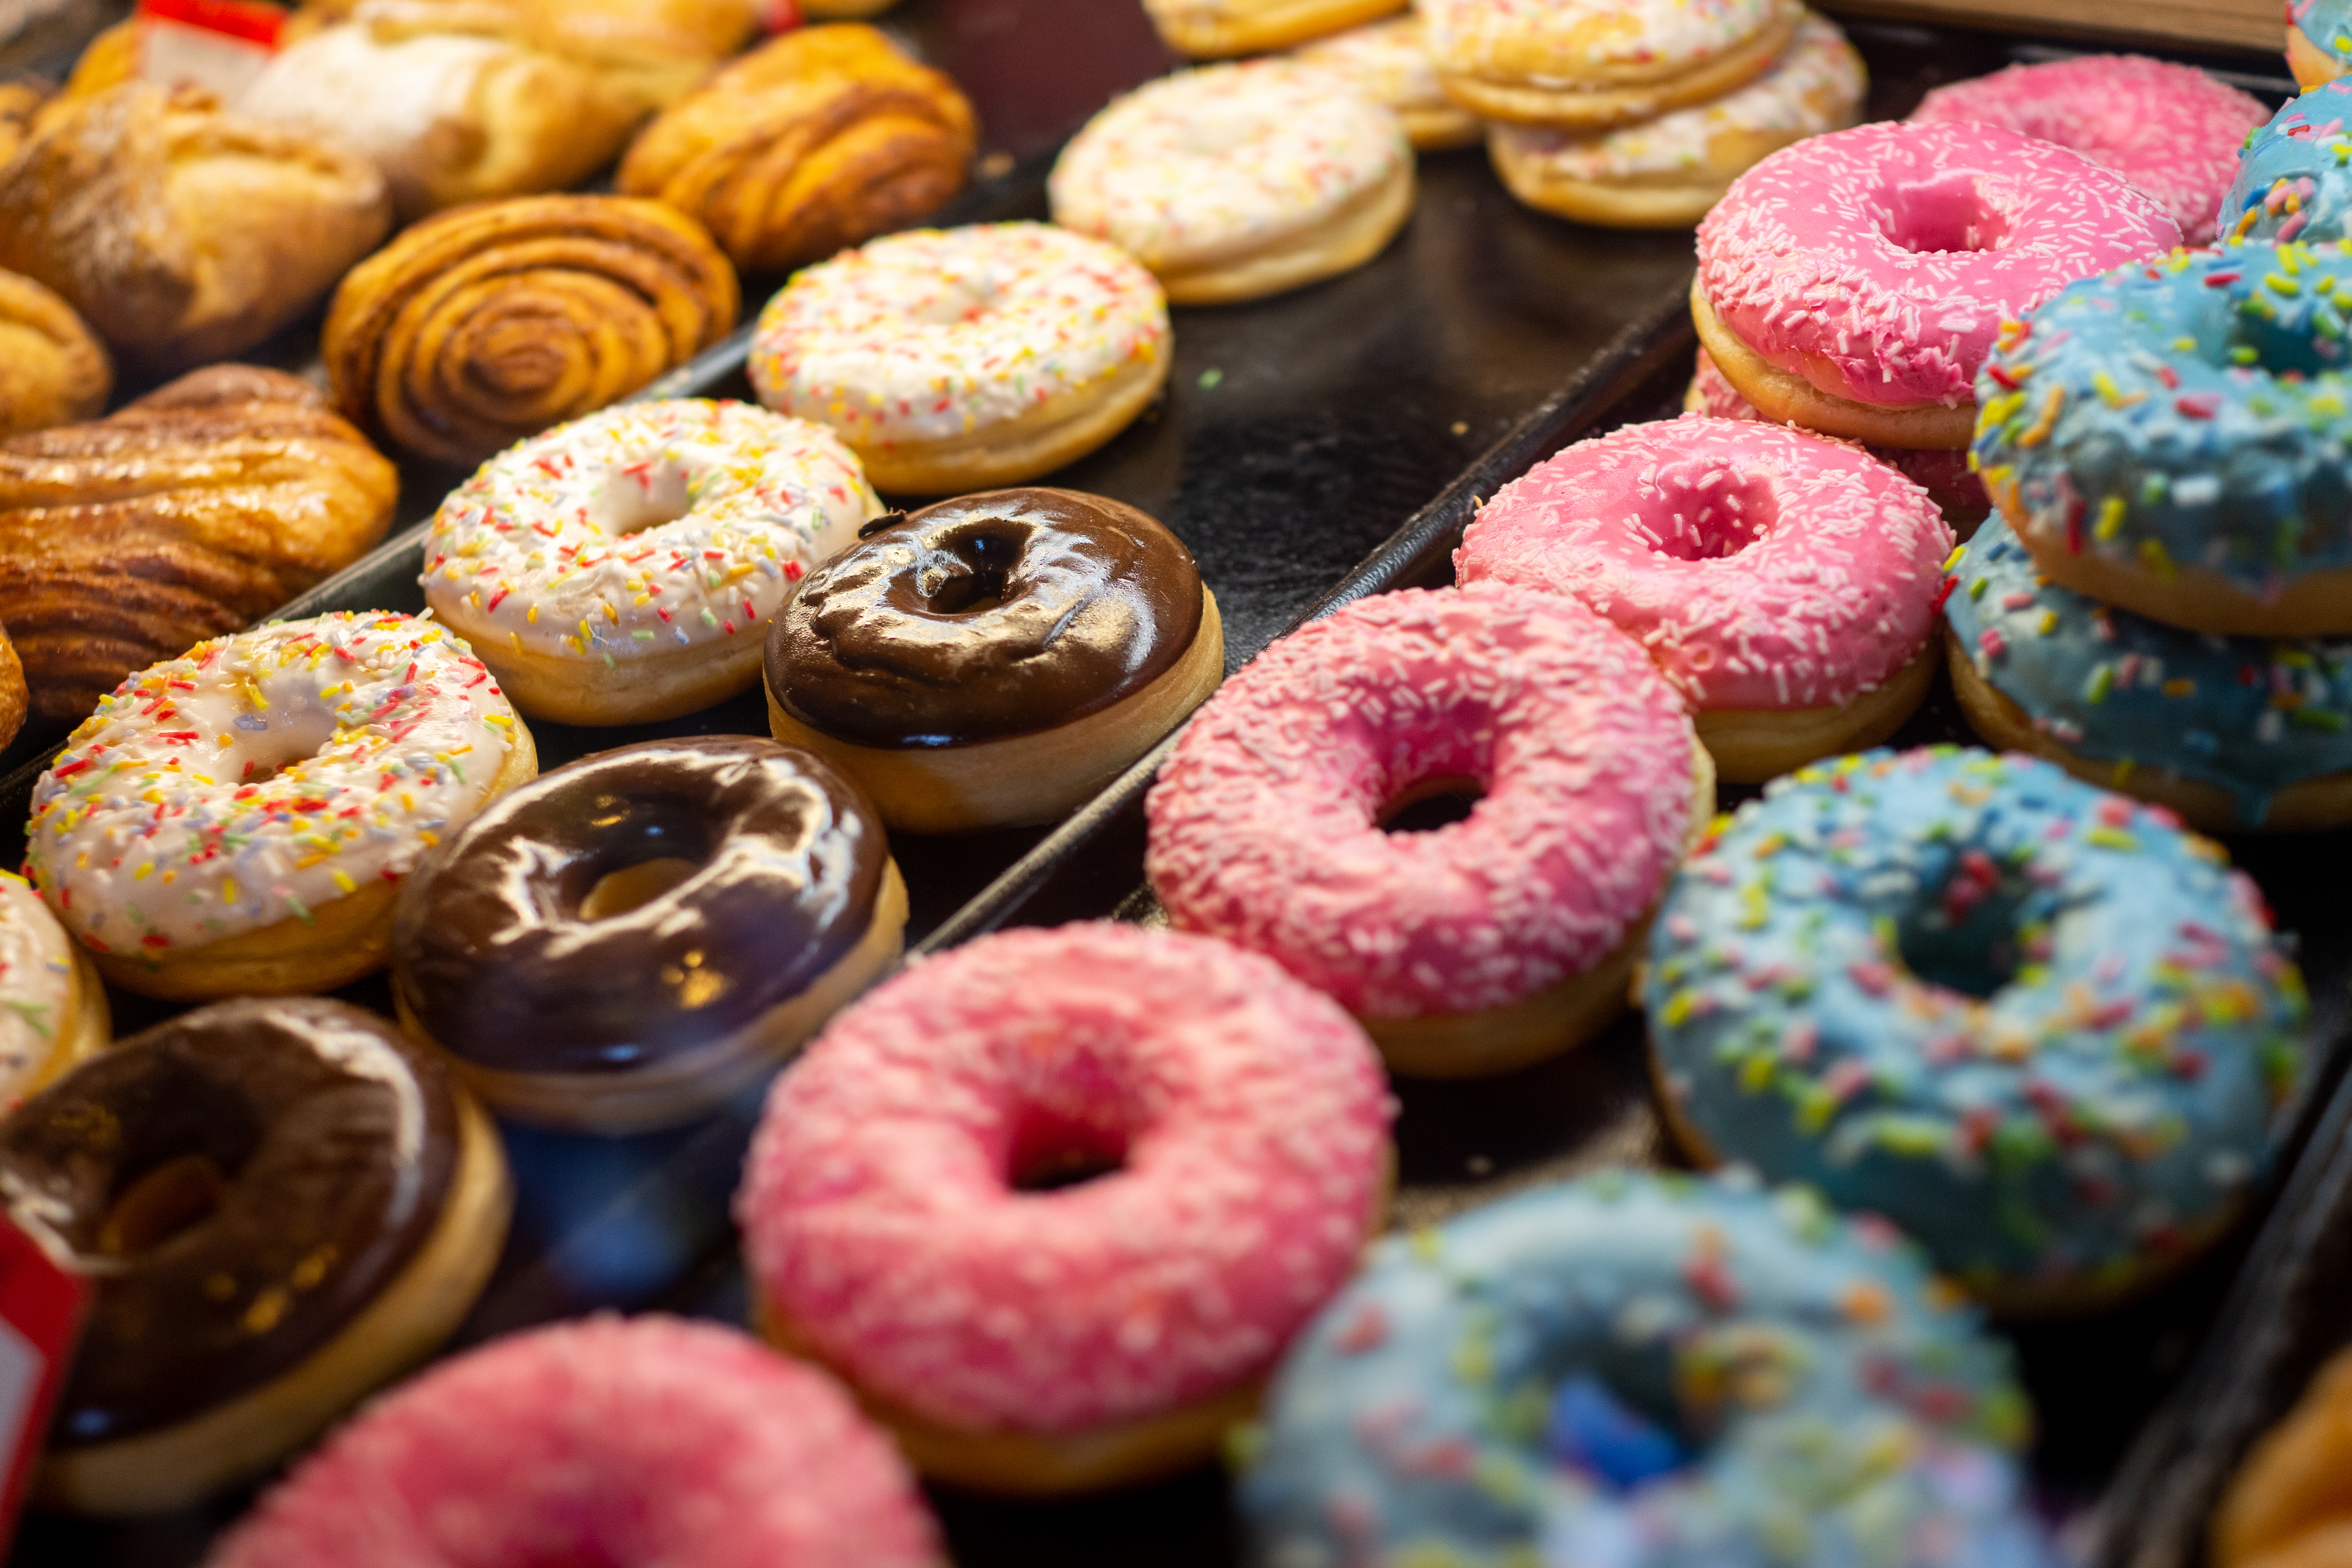 Assorted doughnuts on display, including glazed, chocolate, and sprinkled varieties